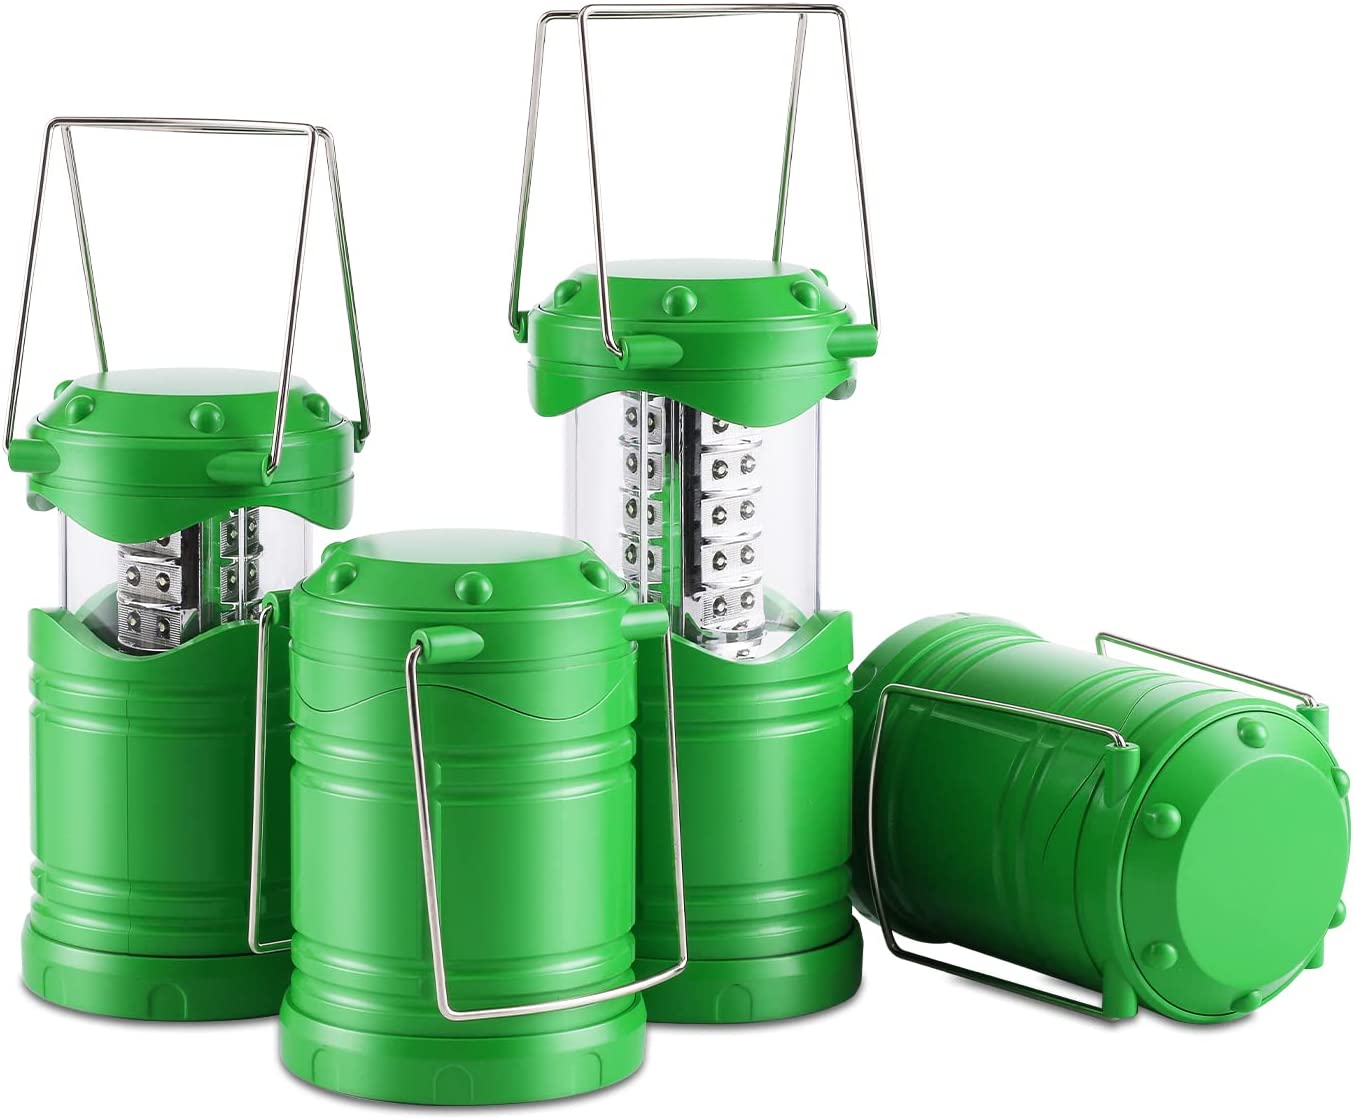 Lichamp 4 Pack LED Camping Lanterns, Battery Powered Camping Lights LED Super Bright Collapsible Flashlight Portable Emergency Supplies Kit, A4DG